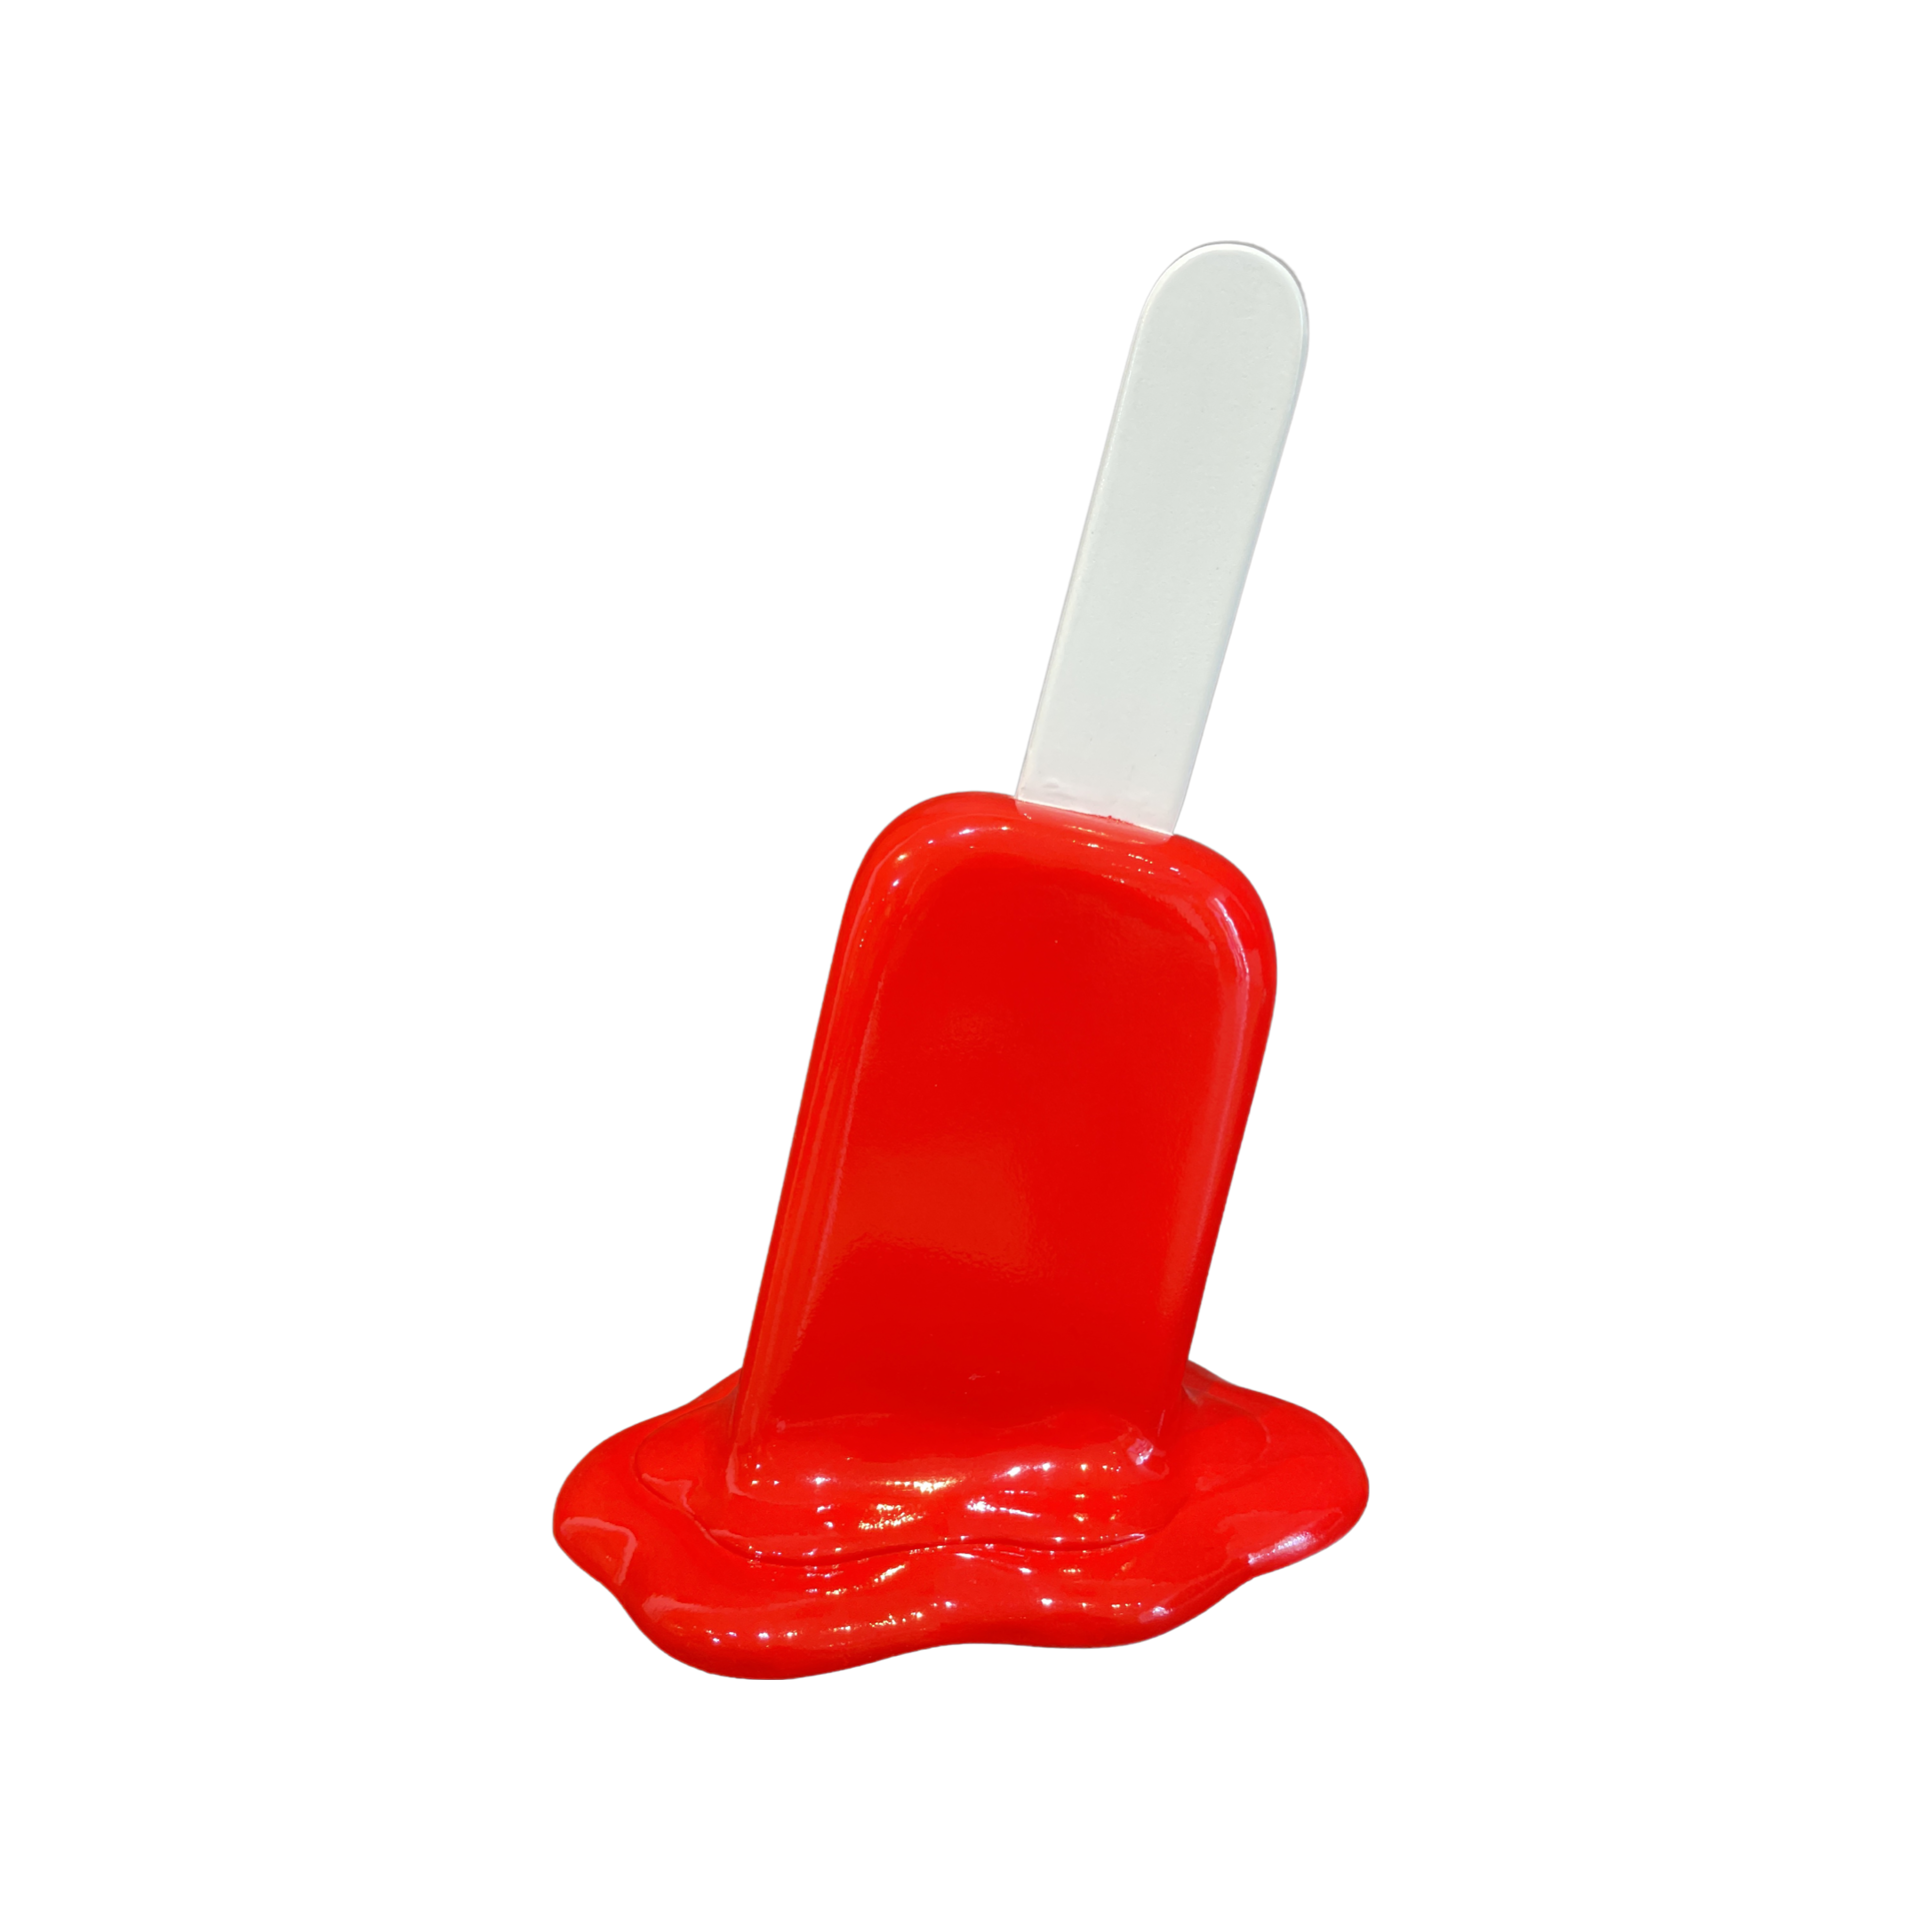 "Red Popsicle" by Popsicles  by Elena Bulatova